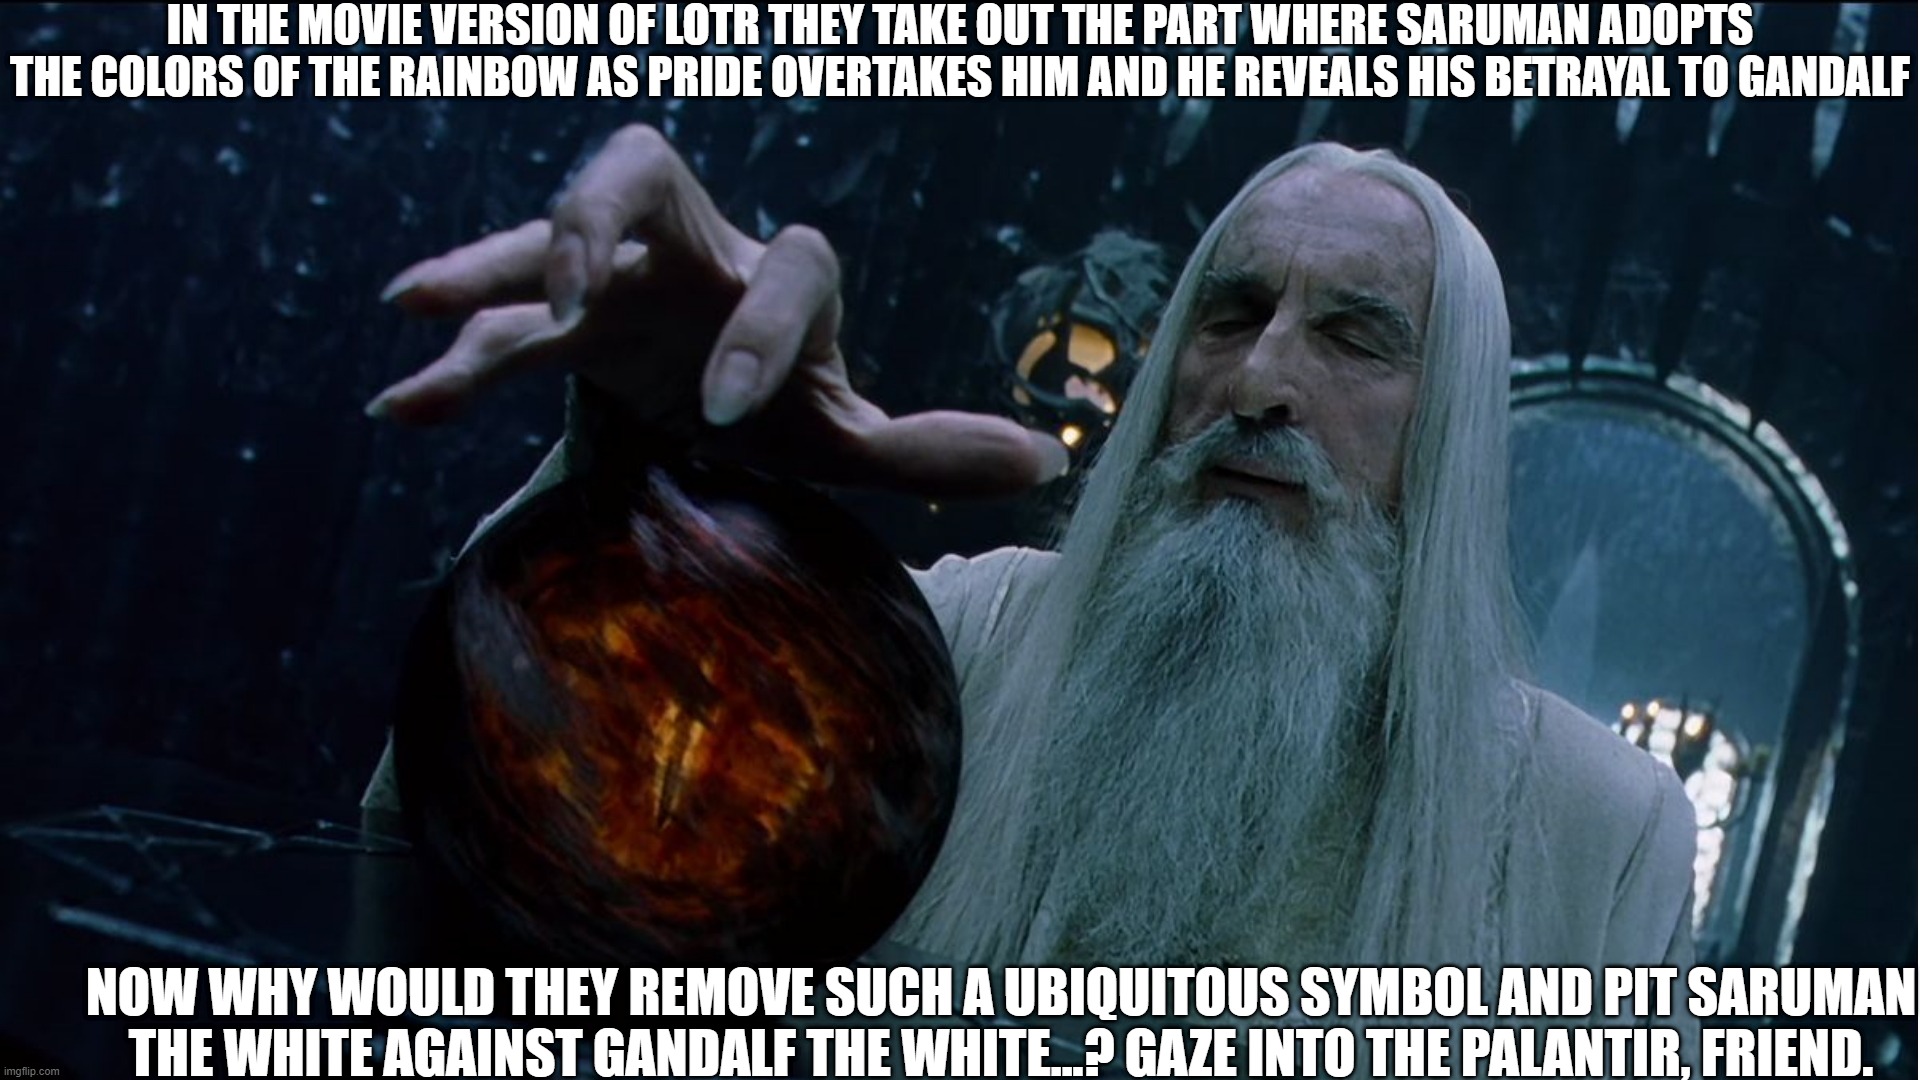 Why they Removed the Rainbow from the Movie | IN THE MOVIE VERSION OF LOTR THEY TAKE OUT THE PART WHERE SARUMAN ADOPTS THE COLORS OF THE RAINBOW AS PRIDE OVERTAKES HIM AND HE REVEALS HIS BETRAYAL TO GANDALF; NOW WHY WOULD THEY REMOVE SUCH A UBIQUITOUS SYMBOL AND PIT SARUMAN THE WHITE AGAINST GANDALF THE WHITE...? GAZE INTO THE PALANTIR, FRIEND. | image tagged in saruman magically summoning,you know,hollywood gays | made w/ Imgflip meme maker